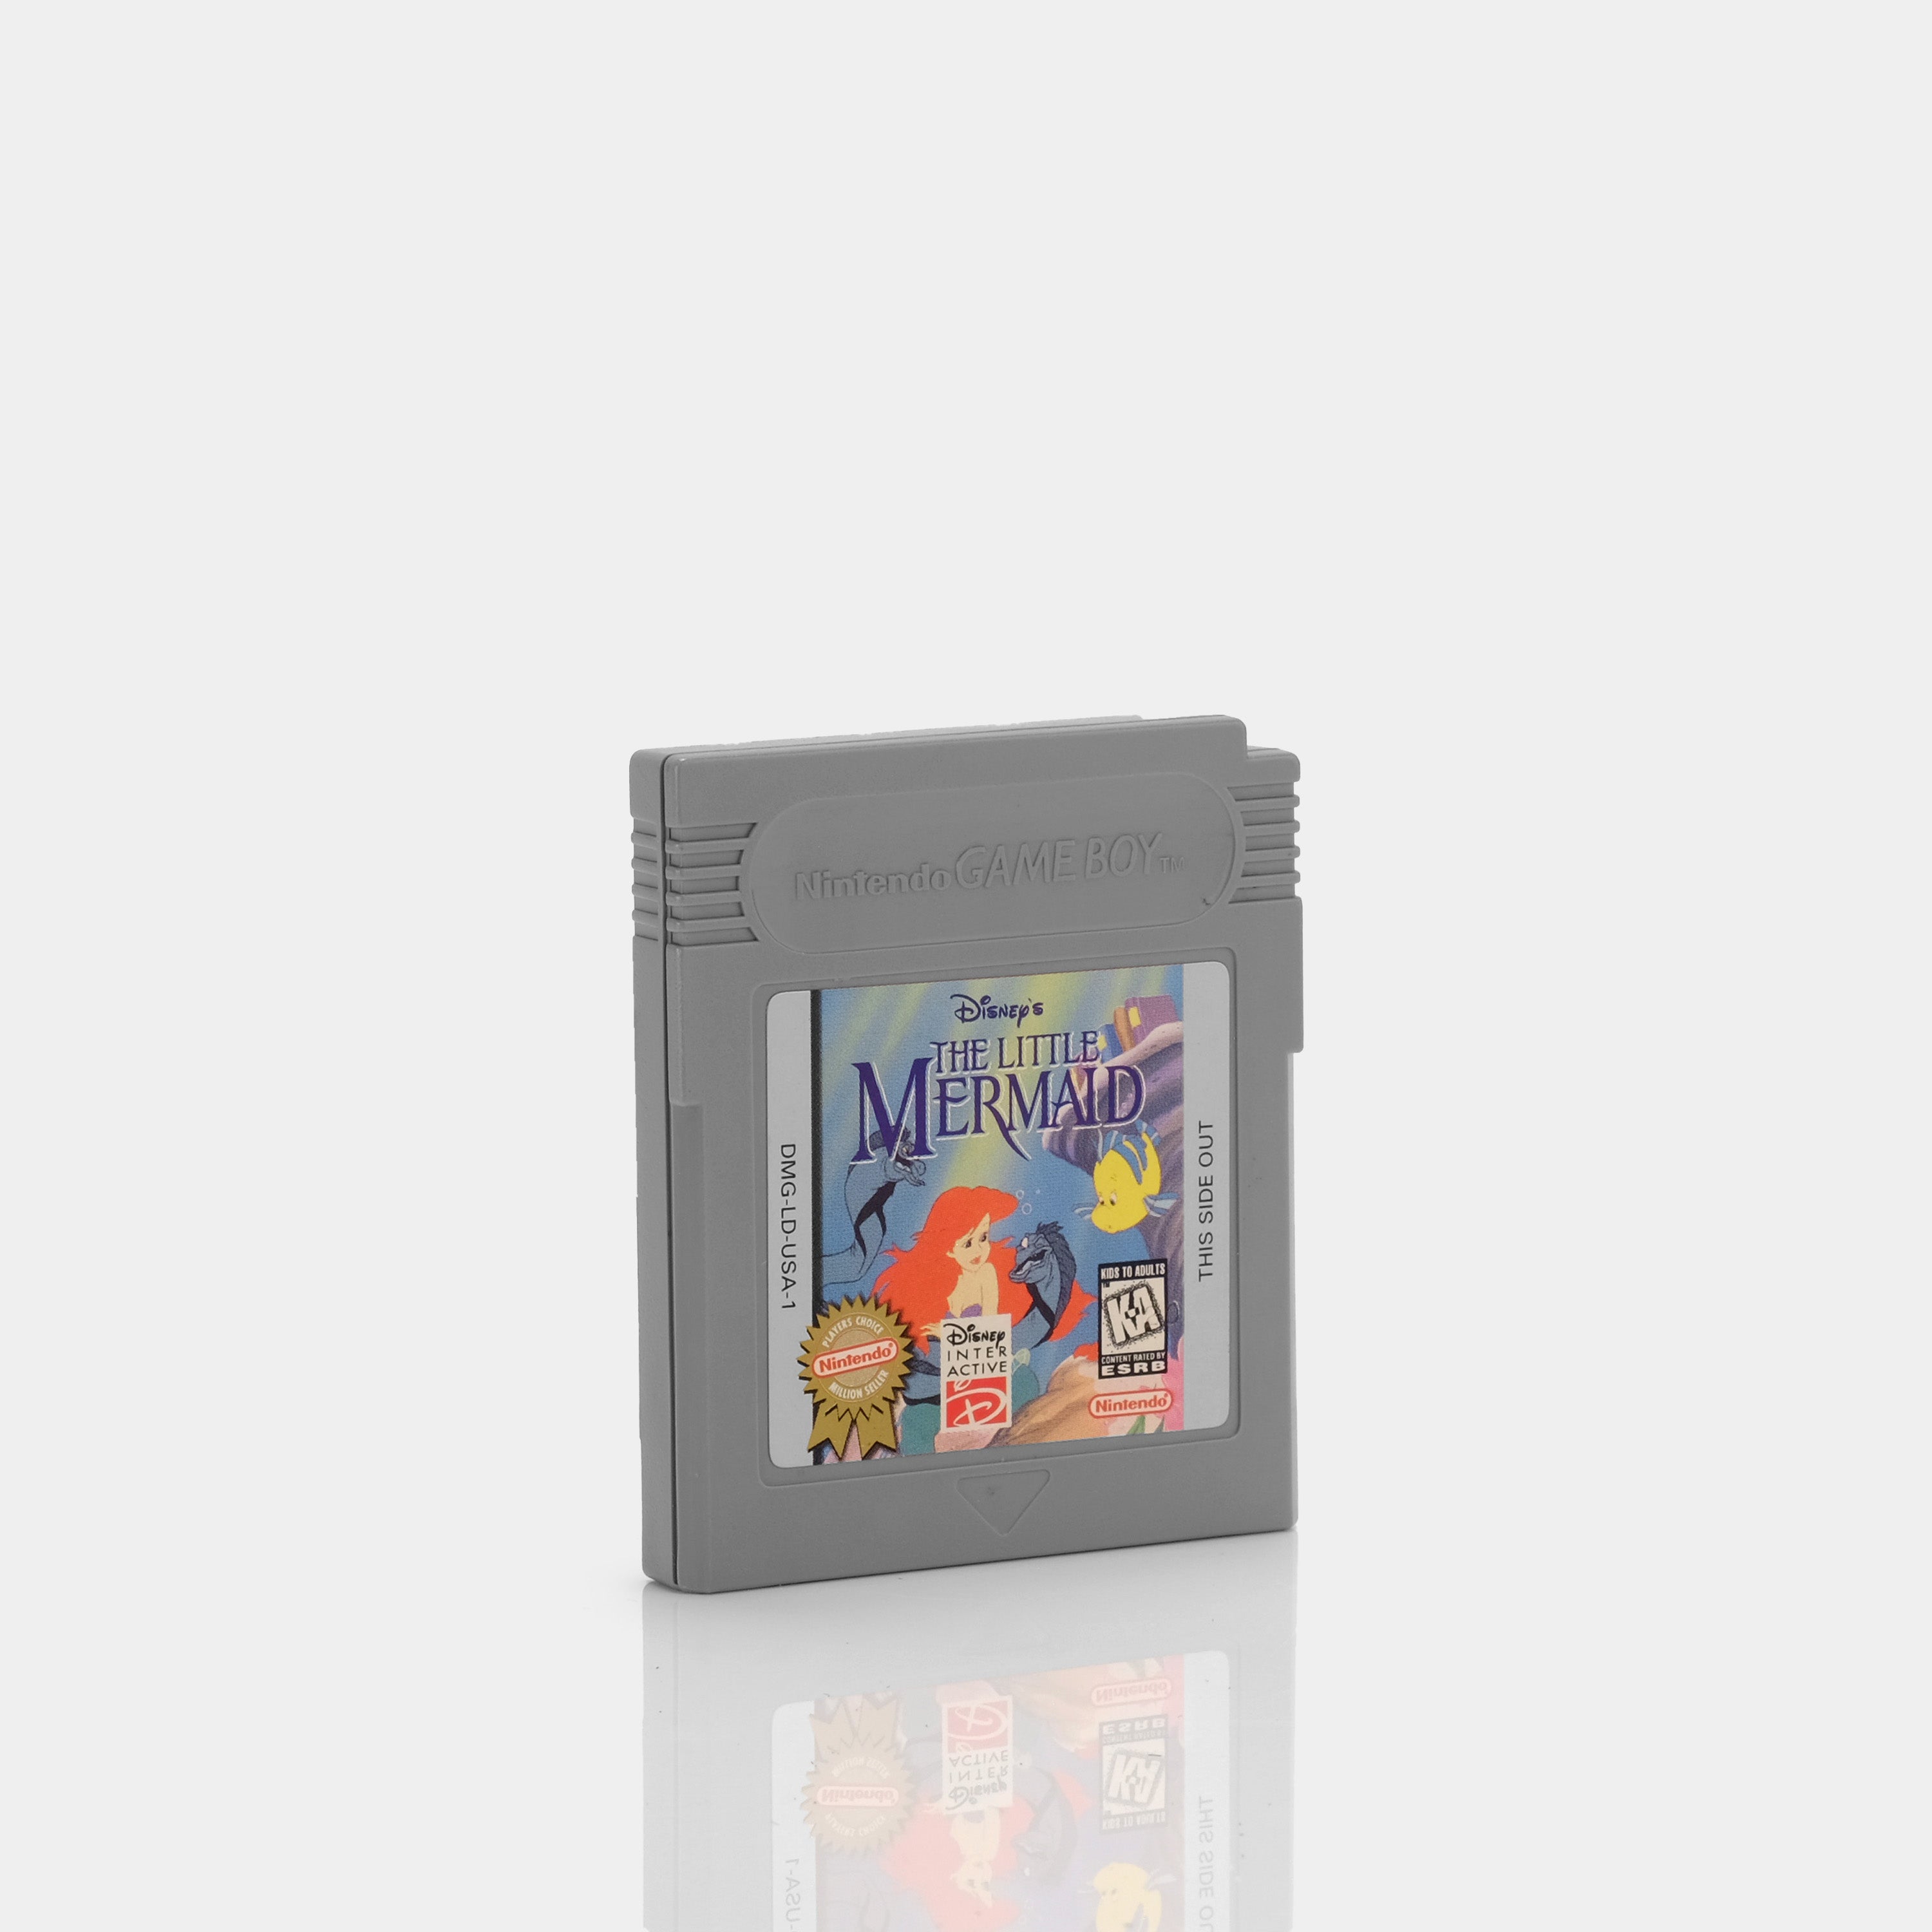 The Little Mermaid Game Boy Game